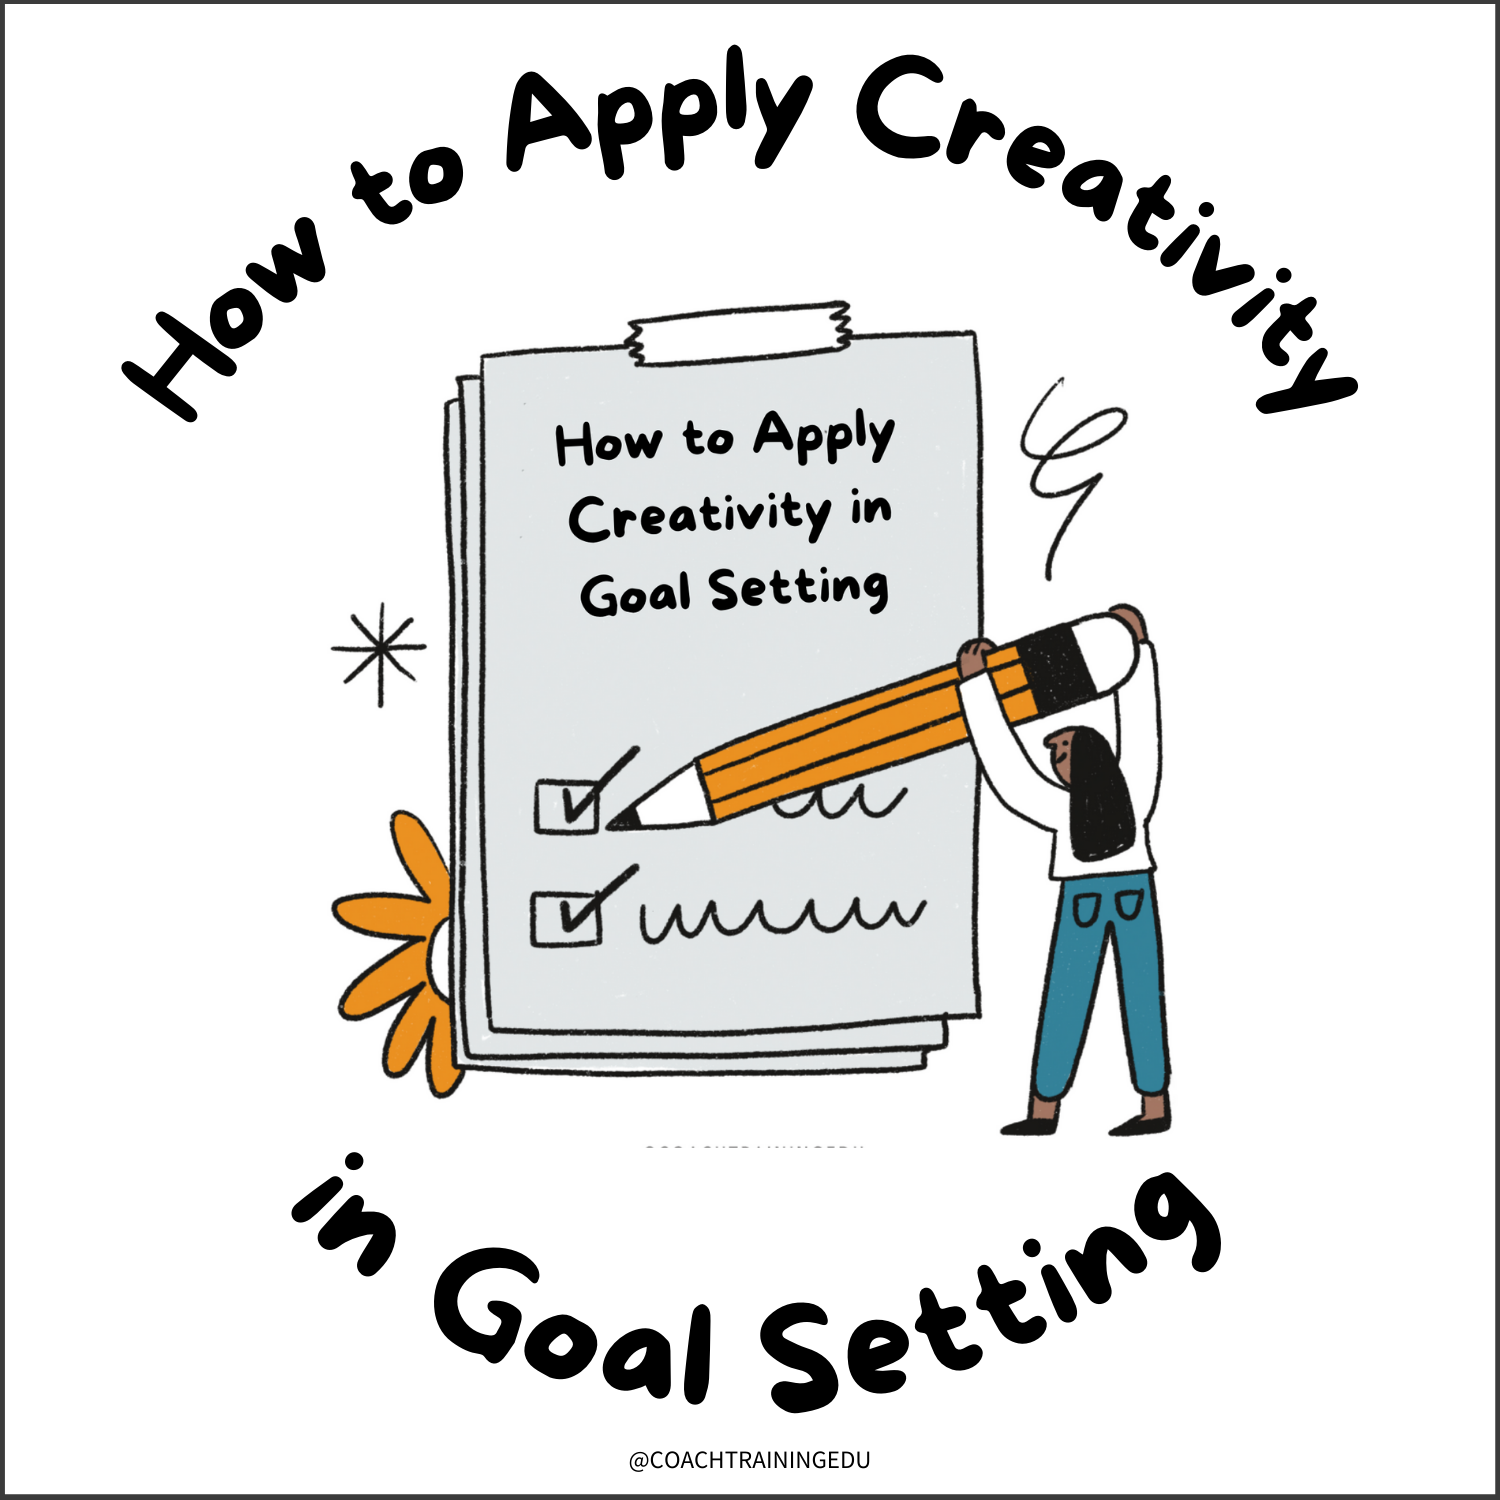 How to Apply Creativity in Goal Setting